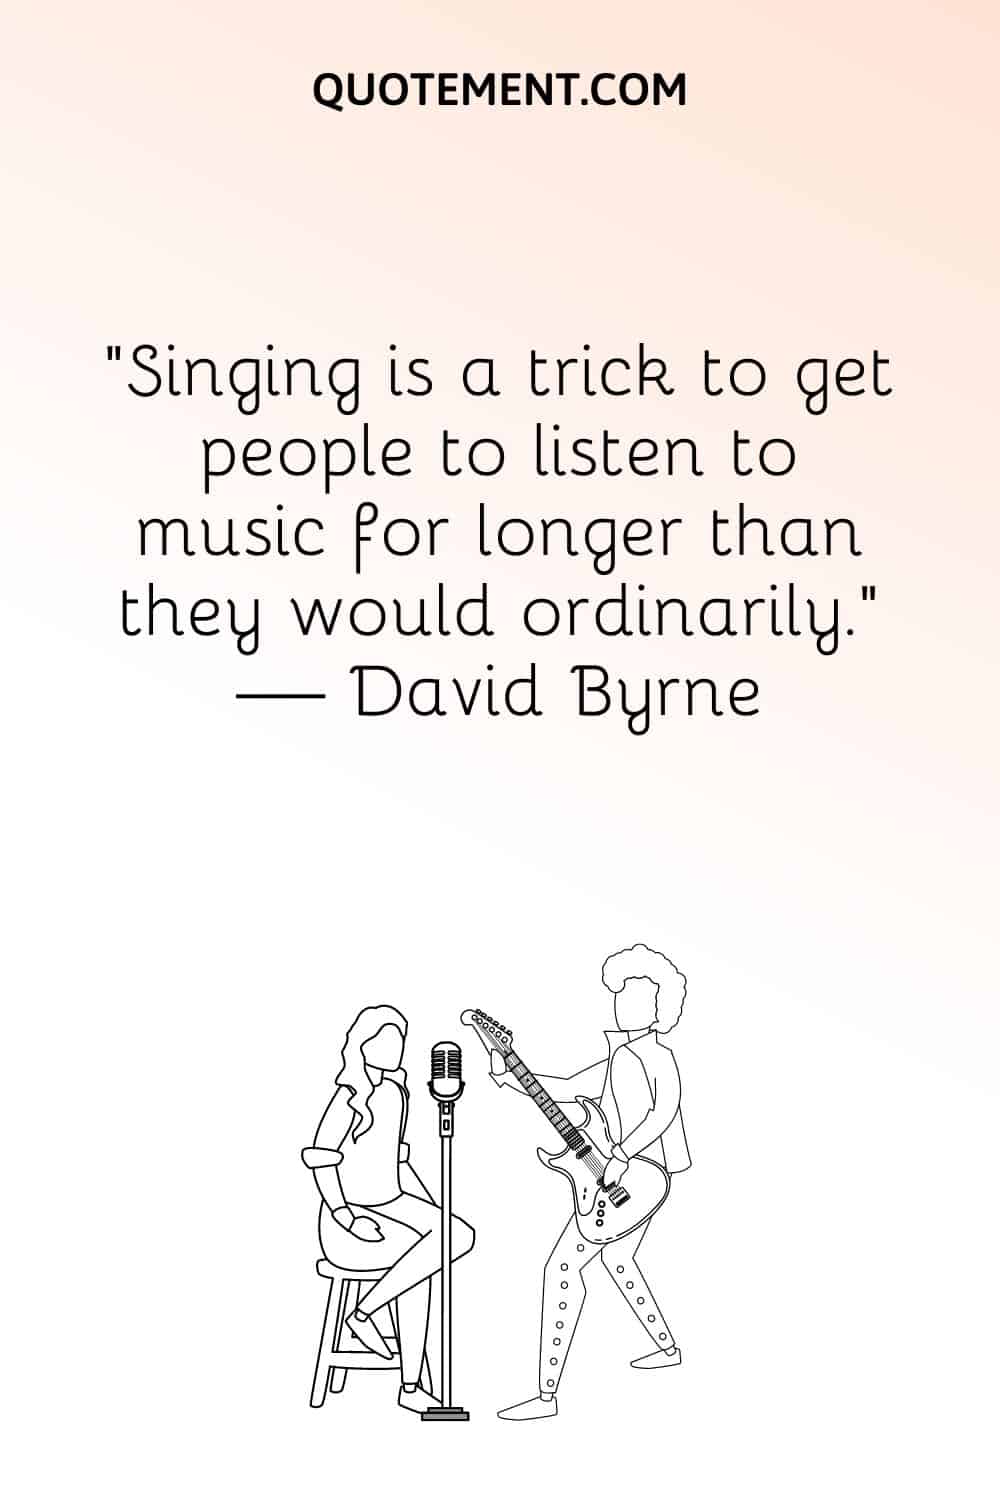 “Singing is a trick to get people to listen to music for longer than they would ordinarily.” — David Byrne